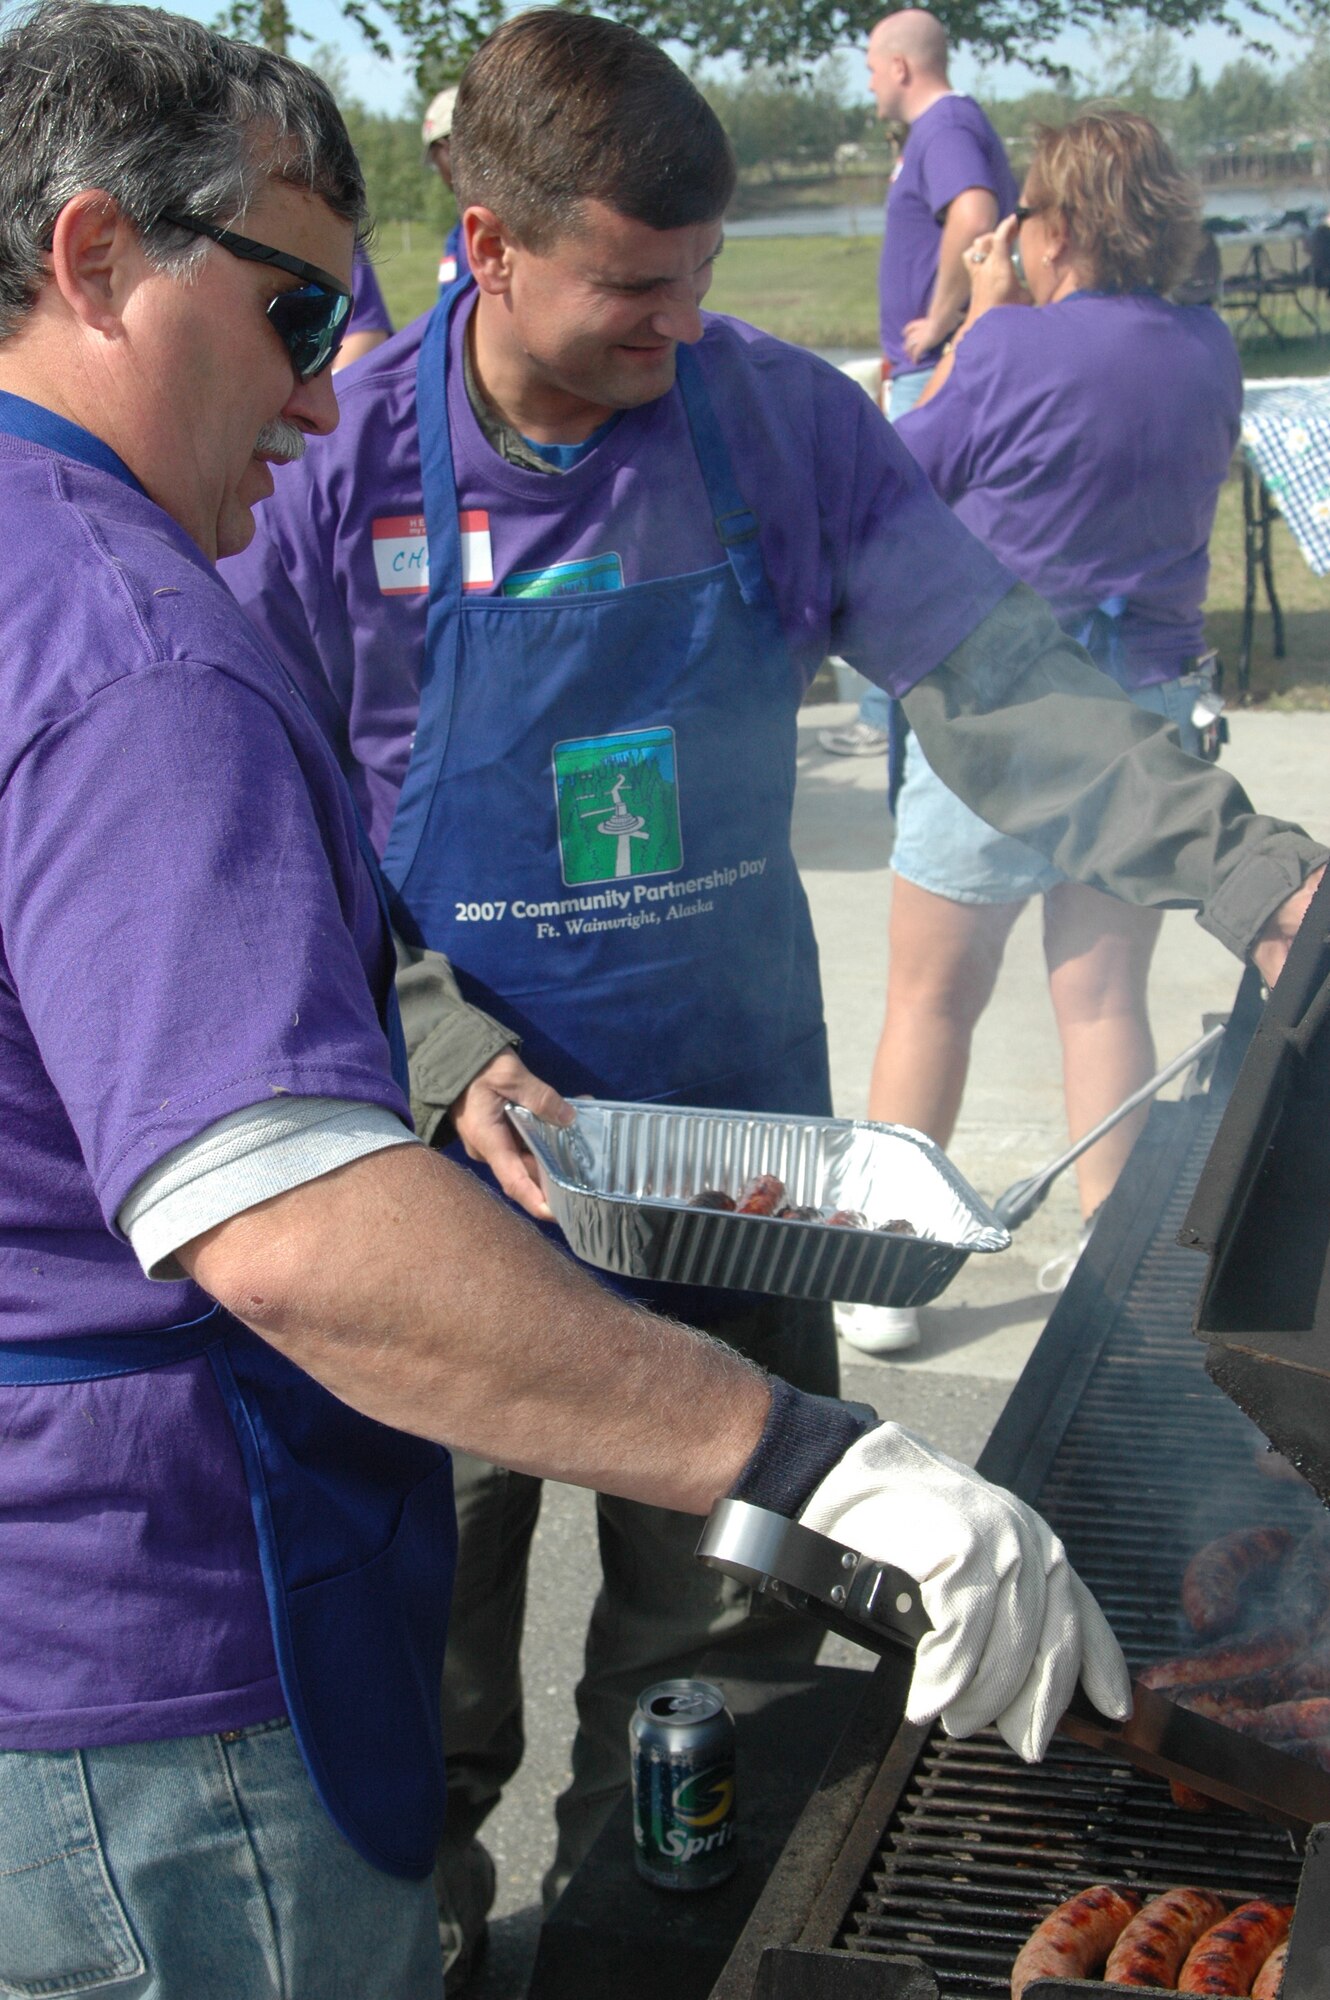 EIELSON AIR FORCE BASE, Alaska--Col. Chip Thompson (back), 354th Operations Group commander, cooks lunch for Community Partnership Day volunteers June 8 at Fort Wainwright.  Eielson AFB and Fort Wainwright leadership and civic leaders serve volunteers as "celebrity chefs" each year. (U.S. Air Force photo by 1st Lt. Bryon McGarry)
